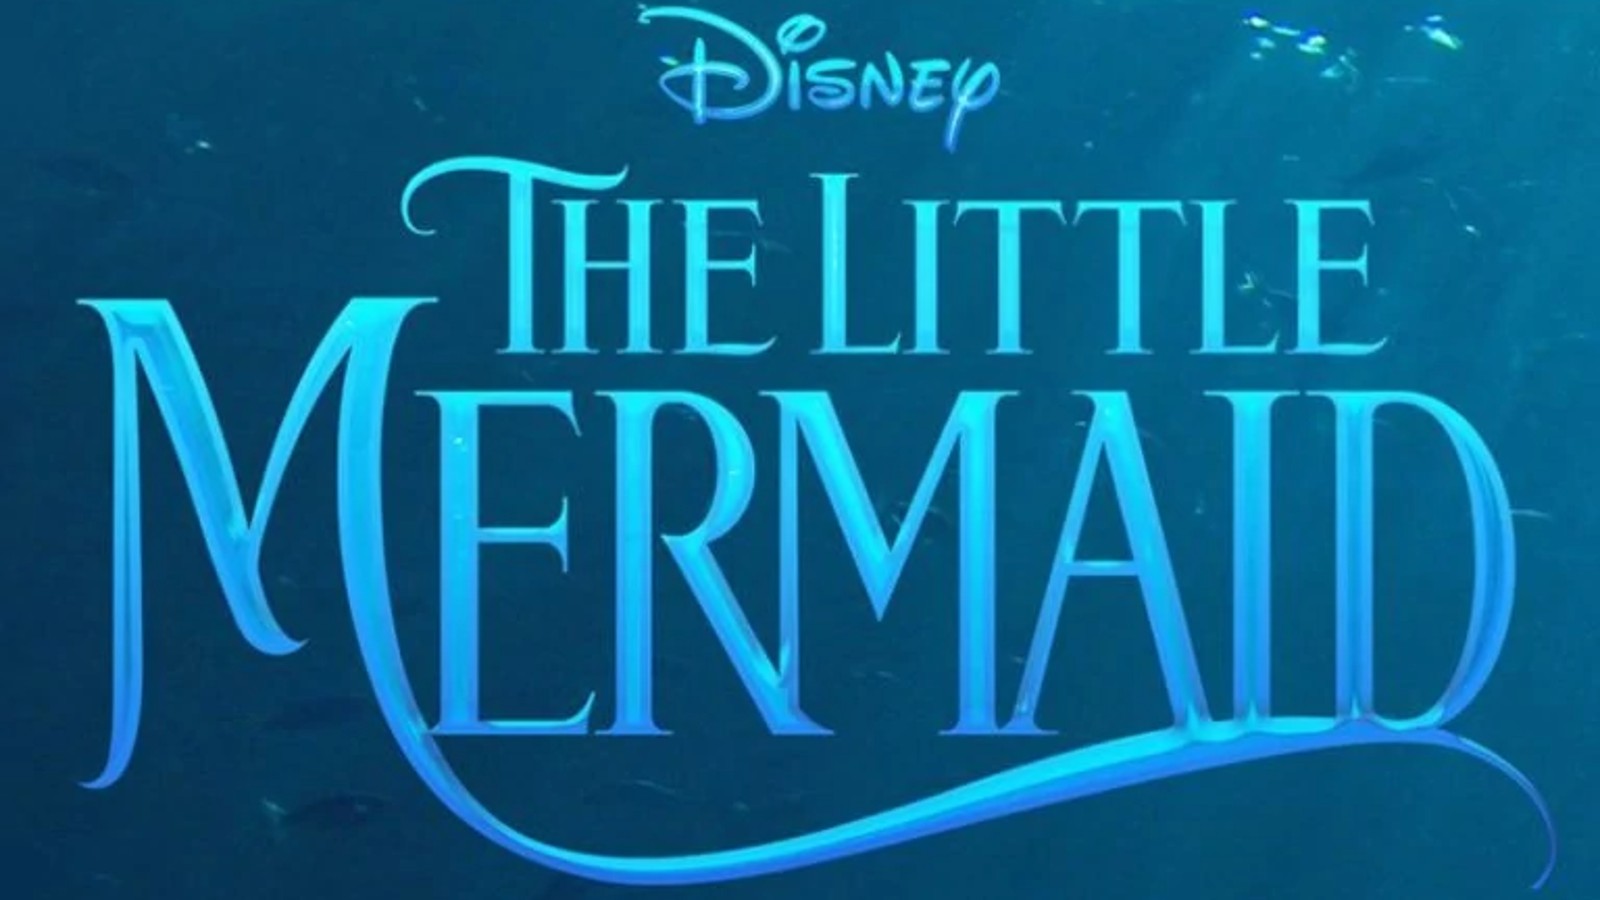 Here is the full cast of 'The Little Mermaid' 2023